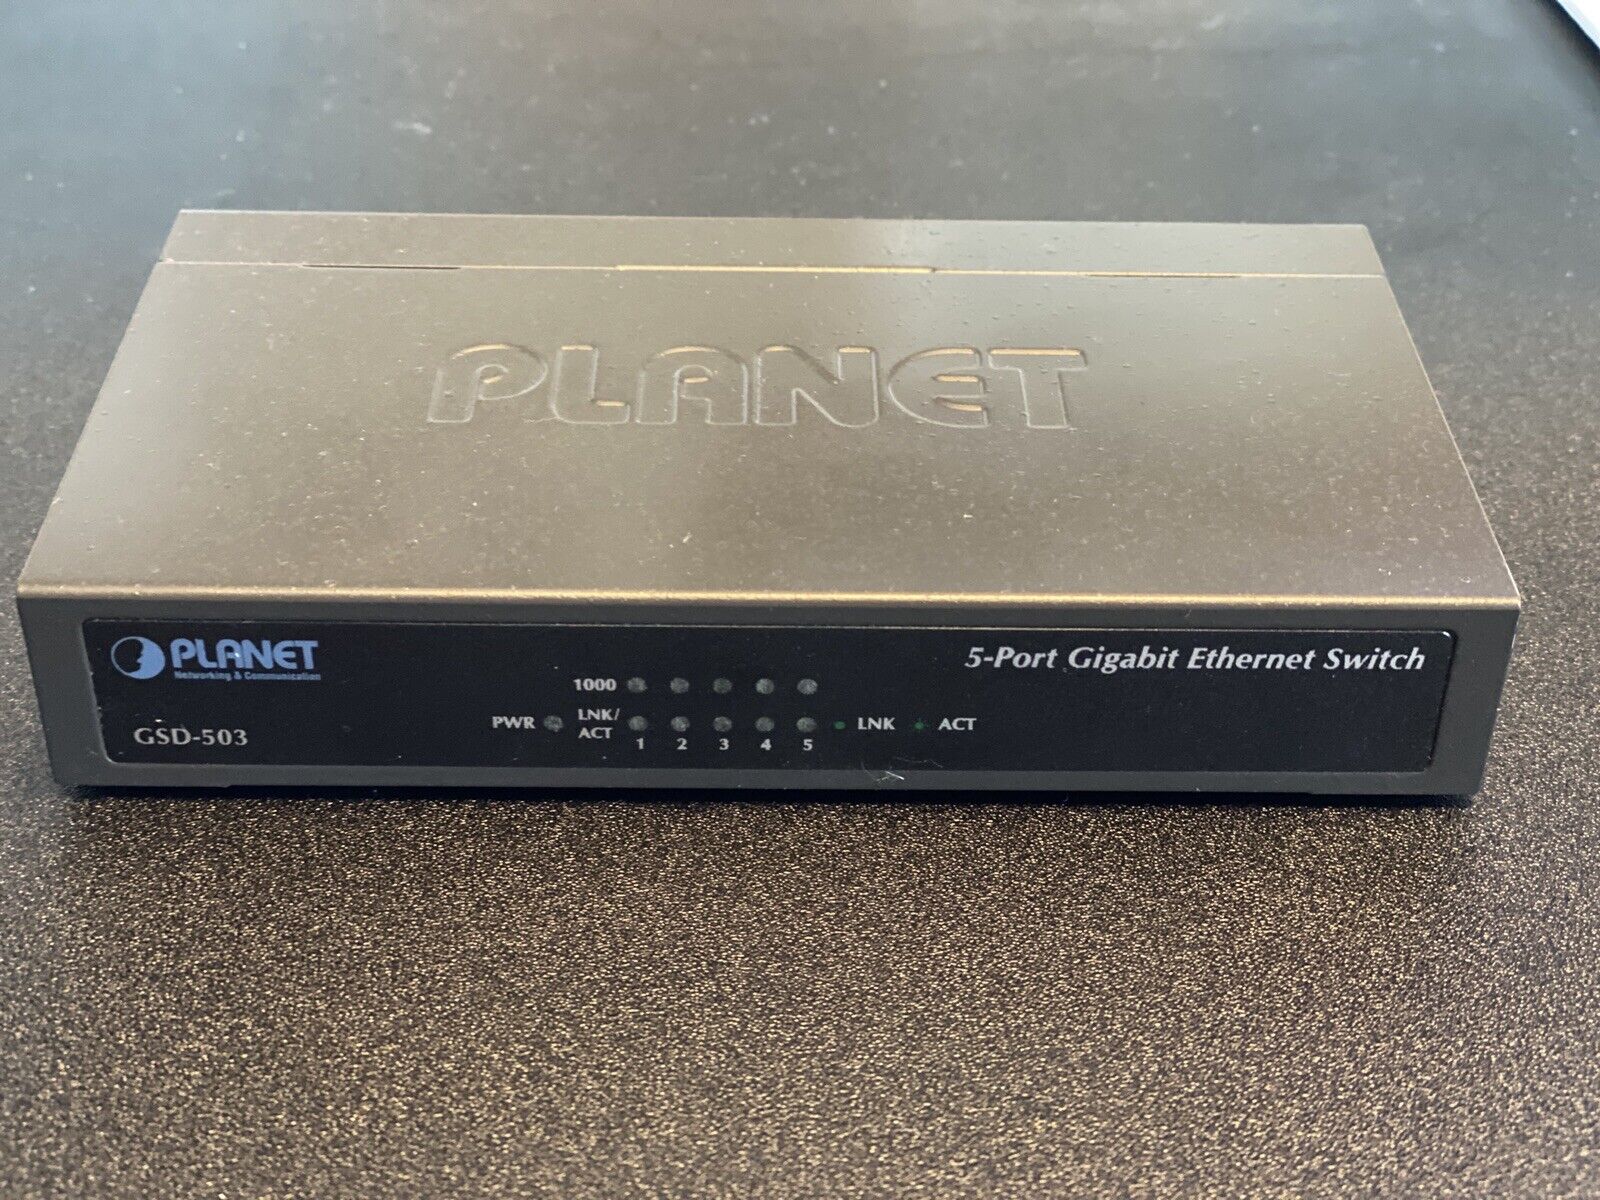 Planet Networking 5 Port Gigabit Ethernet Switch GSD-503